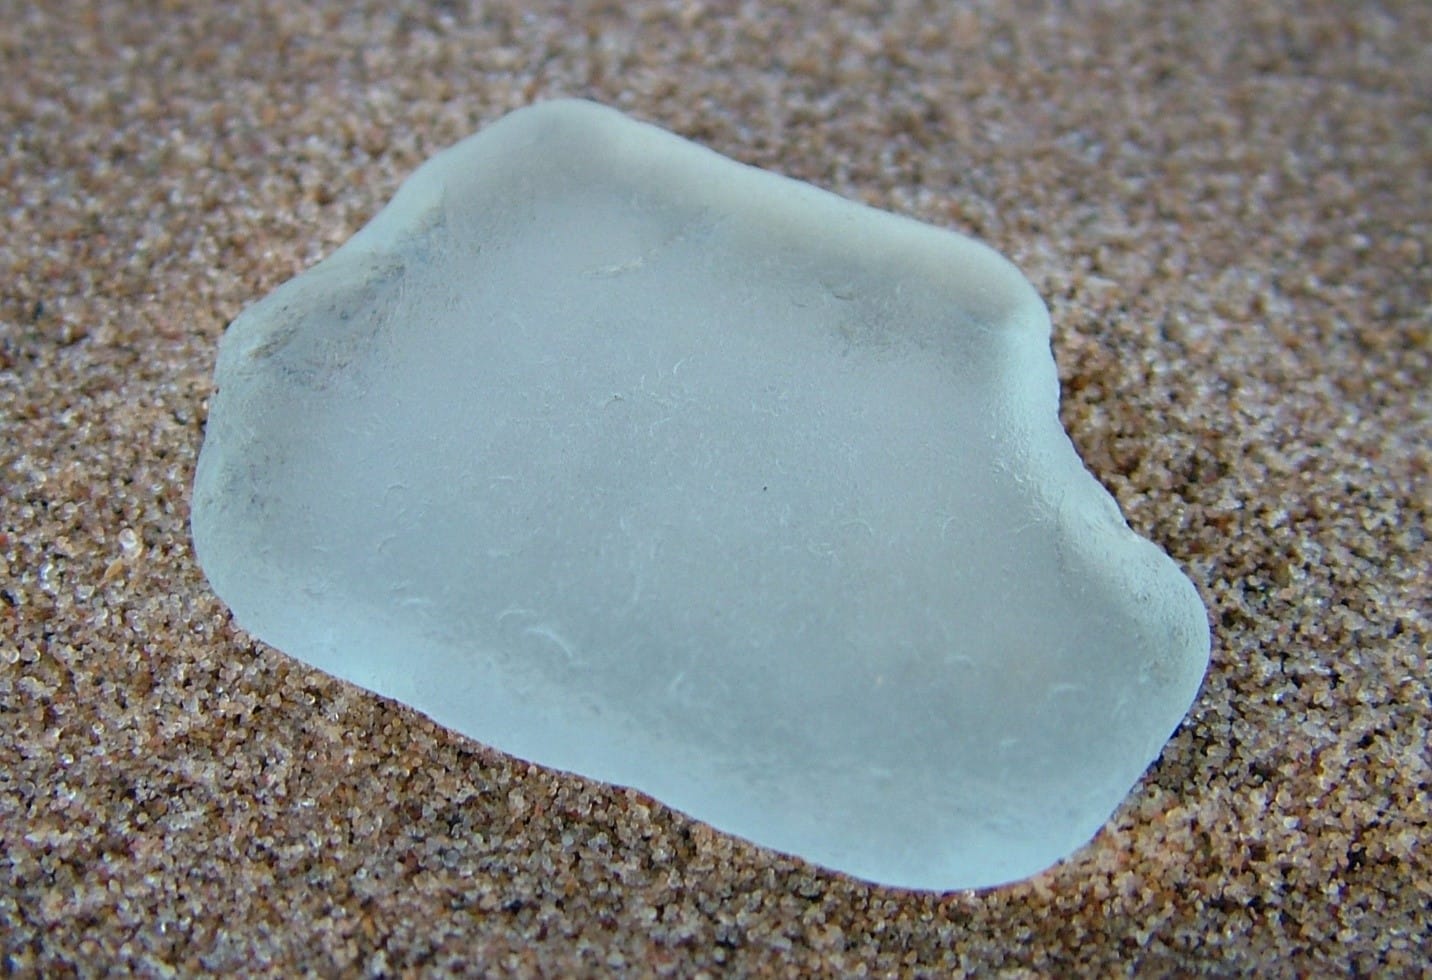 Frosted aqua sea glass laying on beach sand.